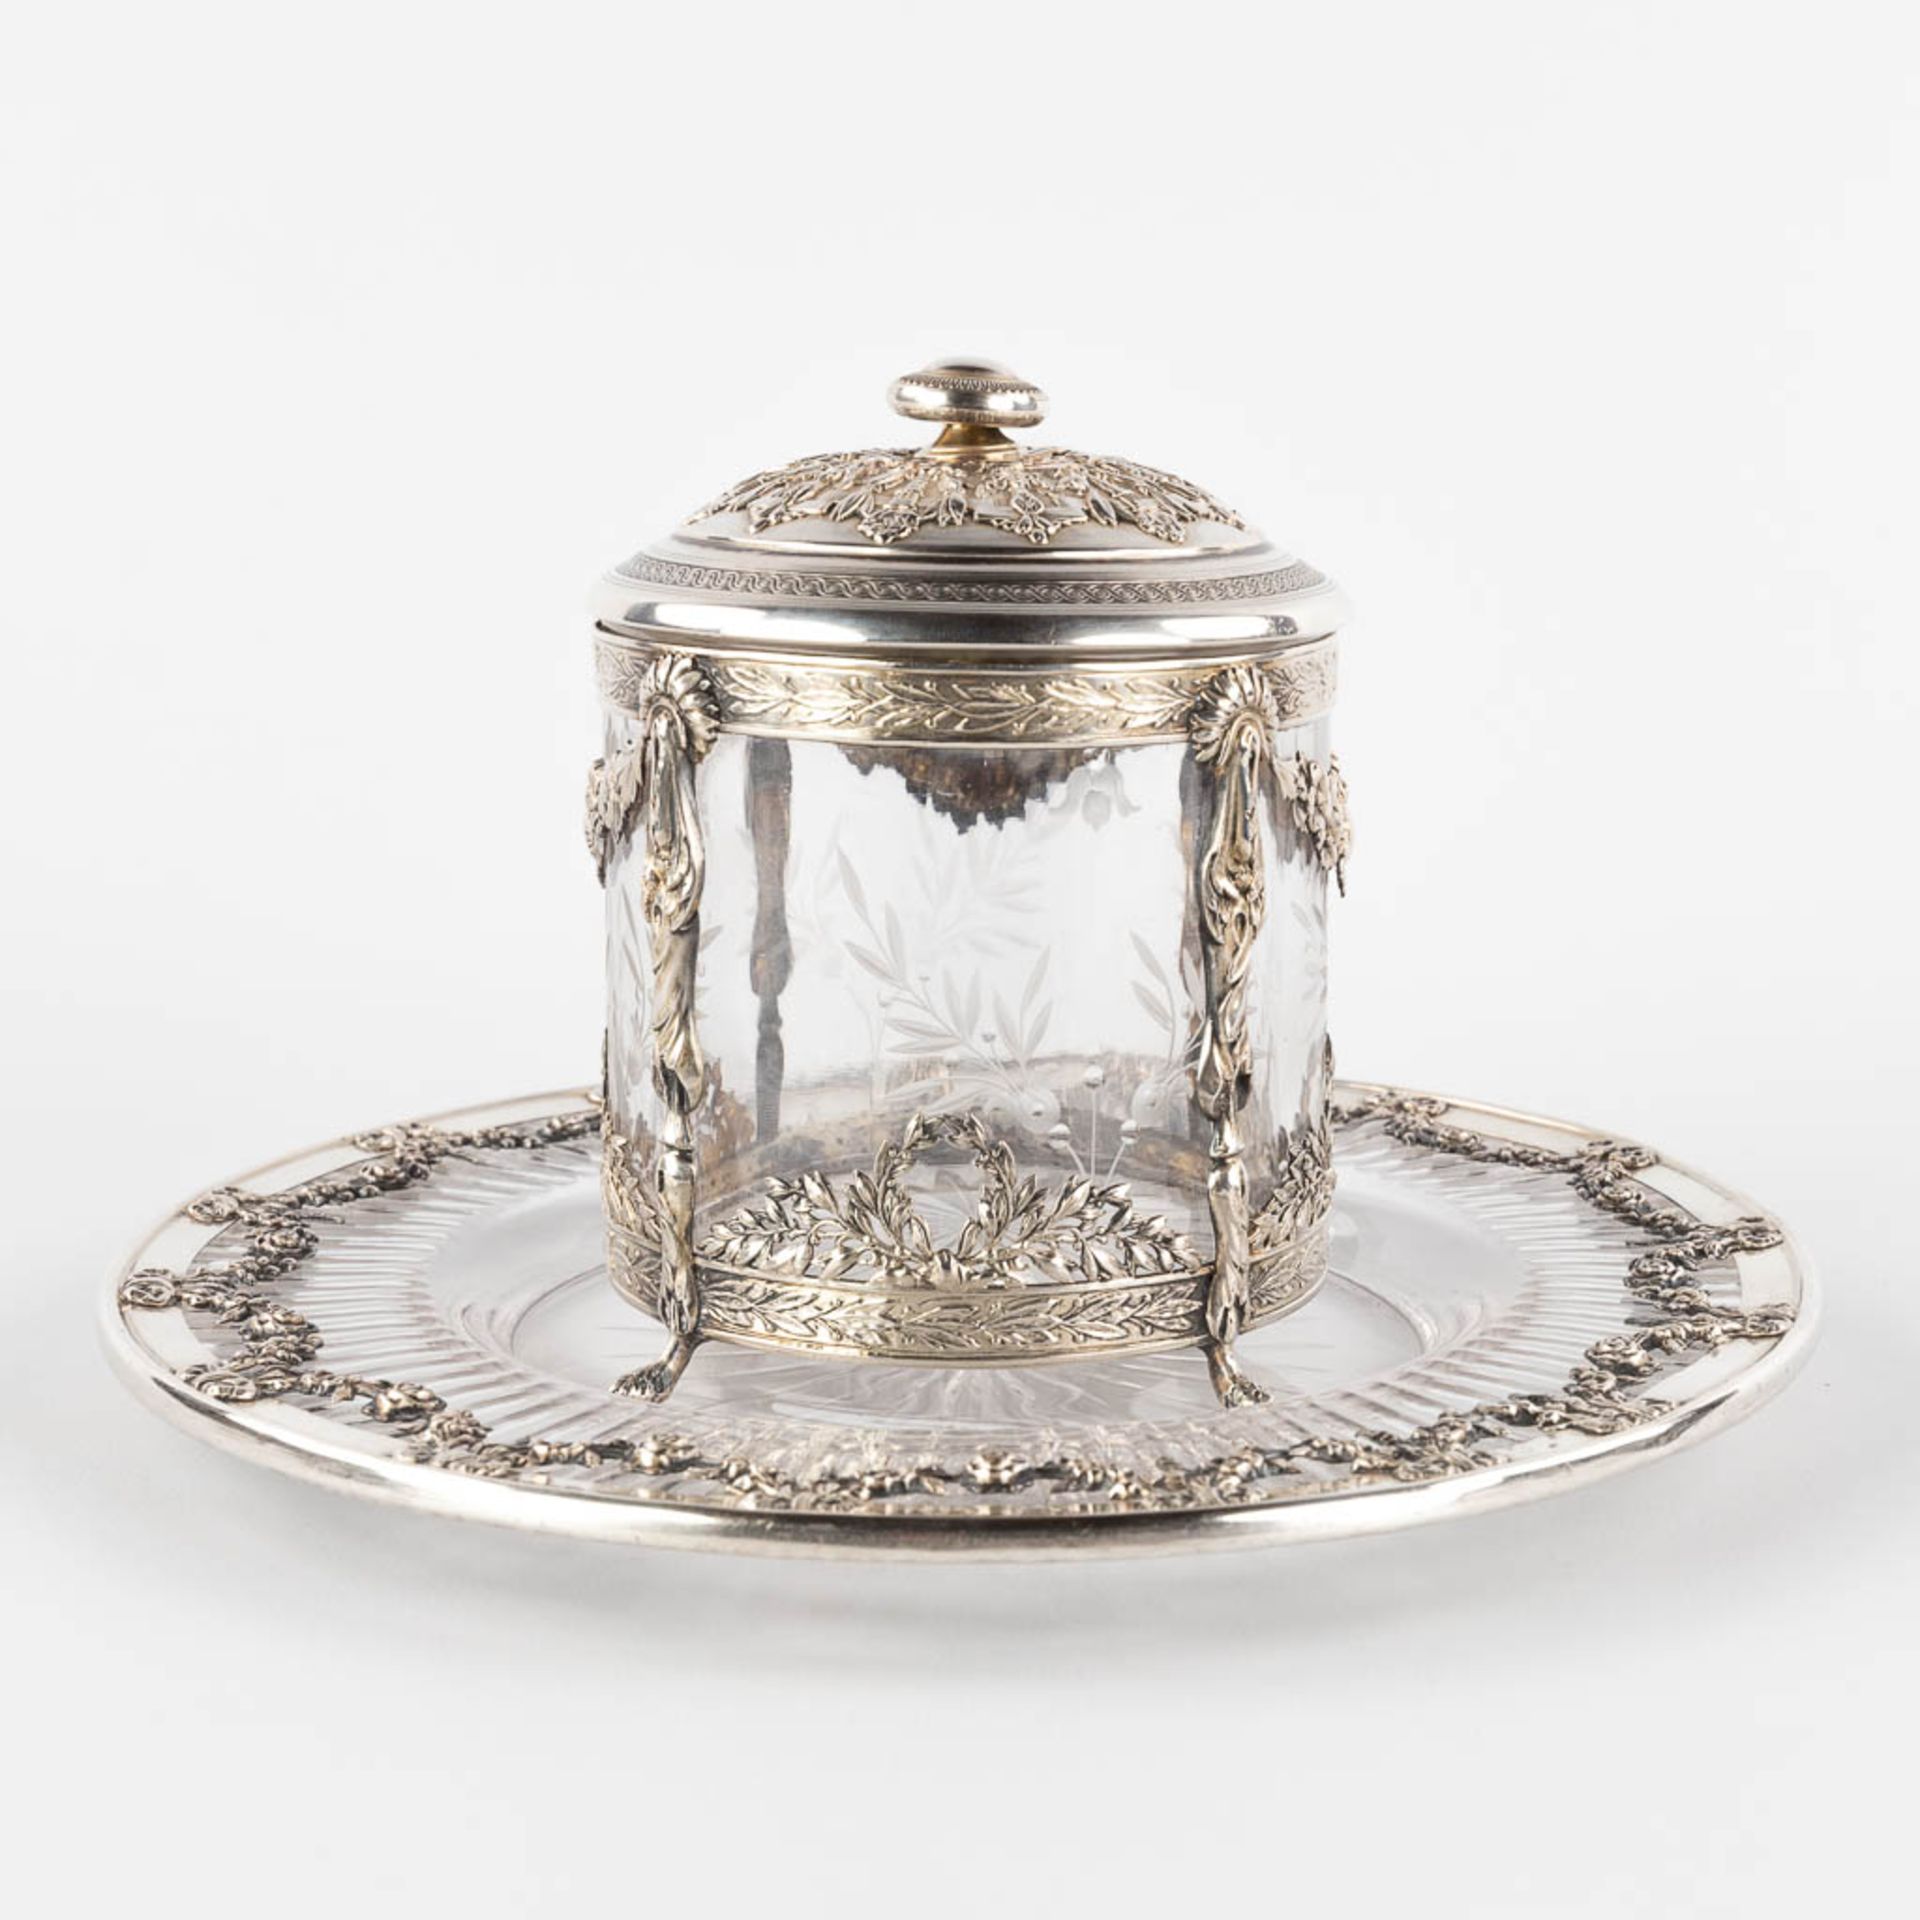 A small storage jar, glass mounted with silver, decorated with garlands. France. (H:13 x D:11,5 cm) - Image 4 of 15